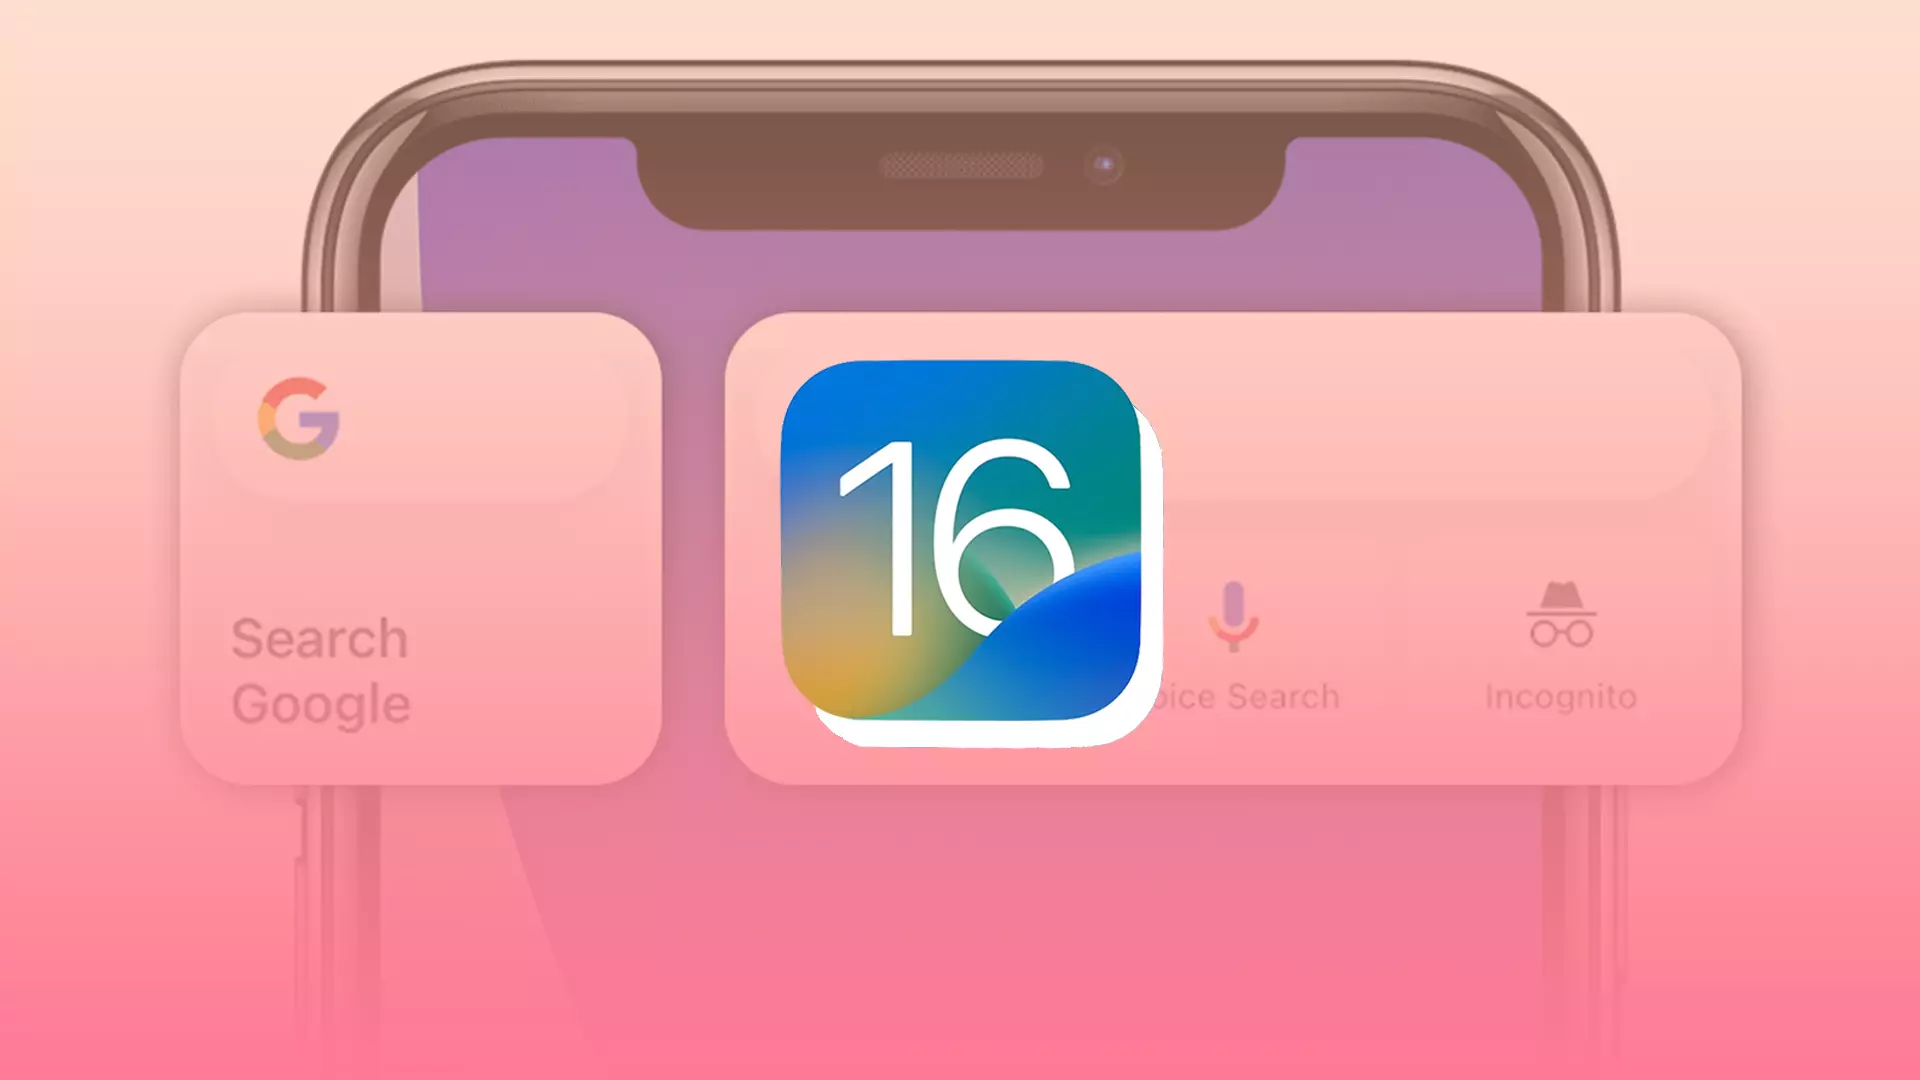 Google widgets are now available on your iOS 16 lock screen